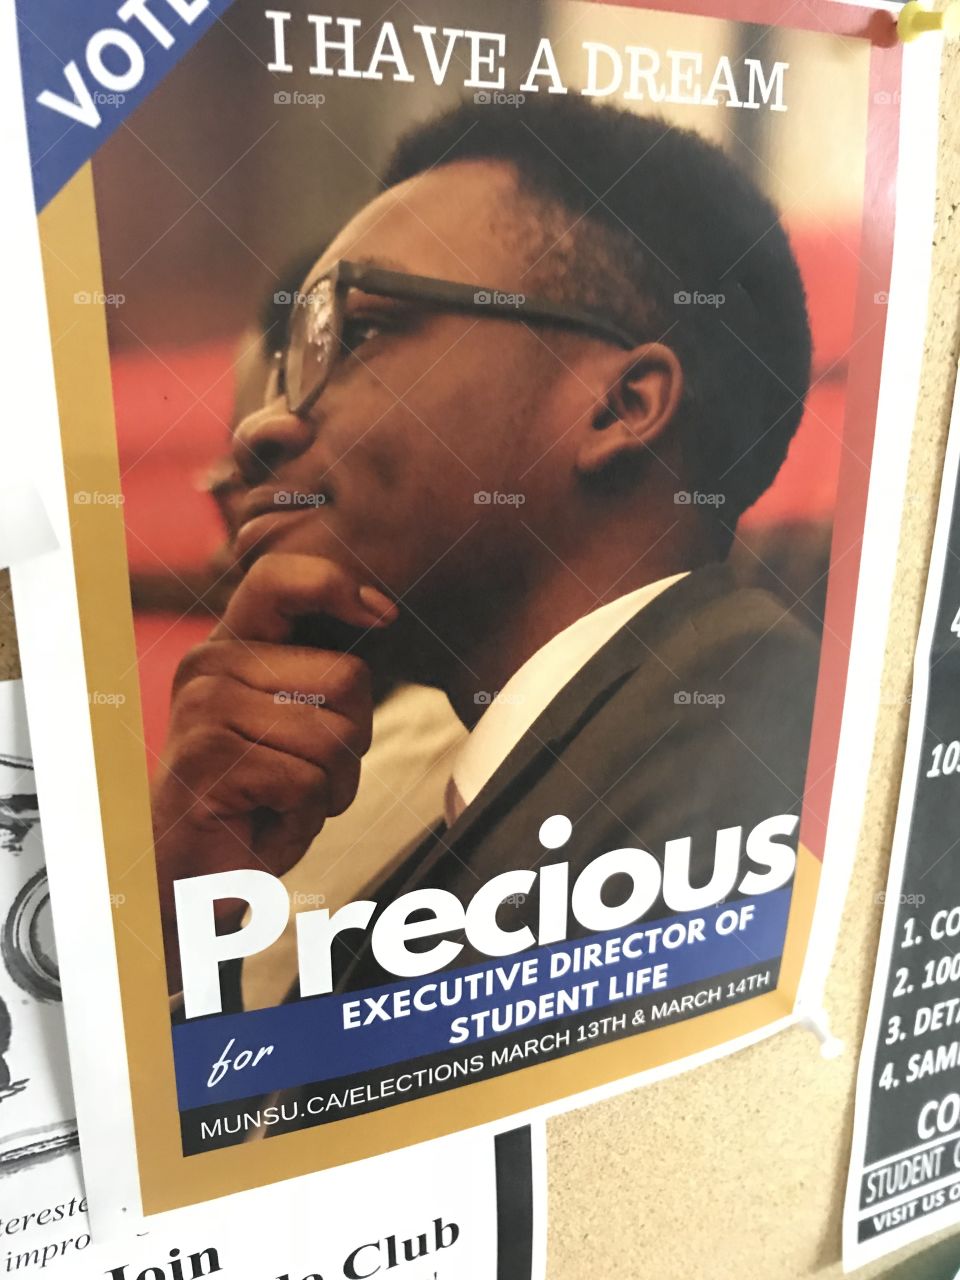 This is yet another MUNSU (MUN student’s union) campaign poster of the St. John’s campus March of 2018 elections. This candidate is invoking the famous Martin Luther king  Junior pose associated with the famous “I have a Dream” slogan, and impact